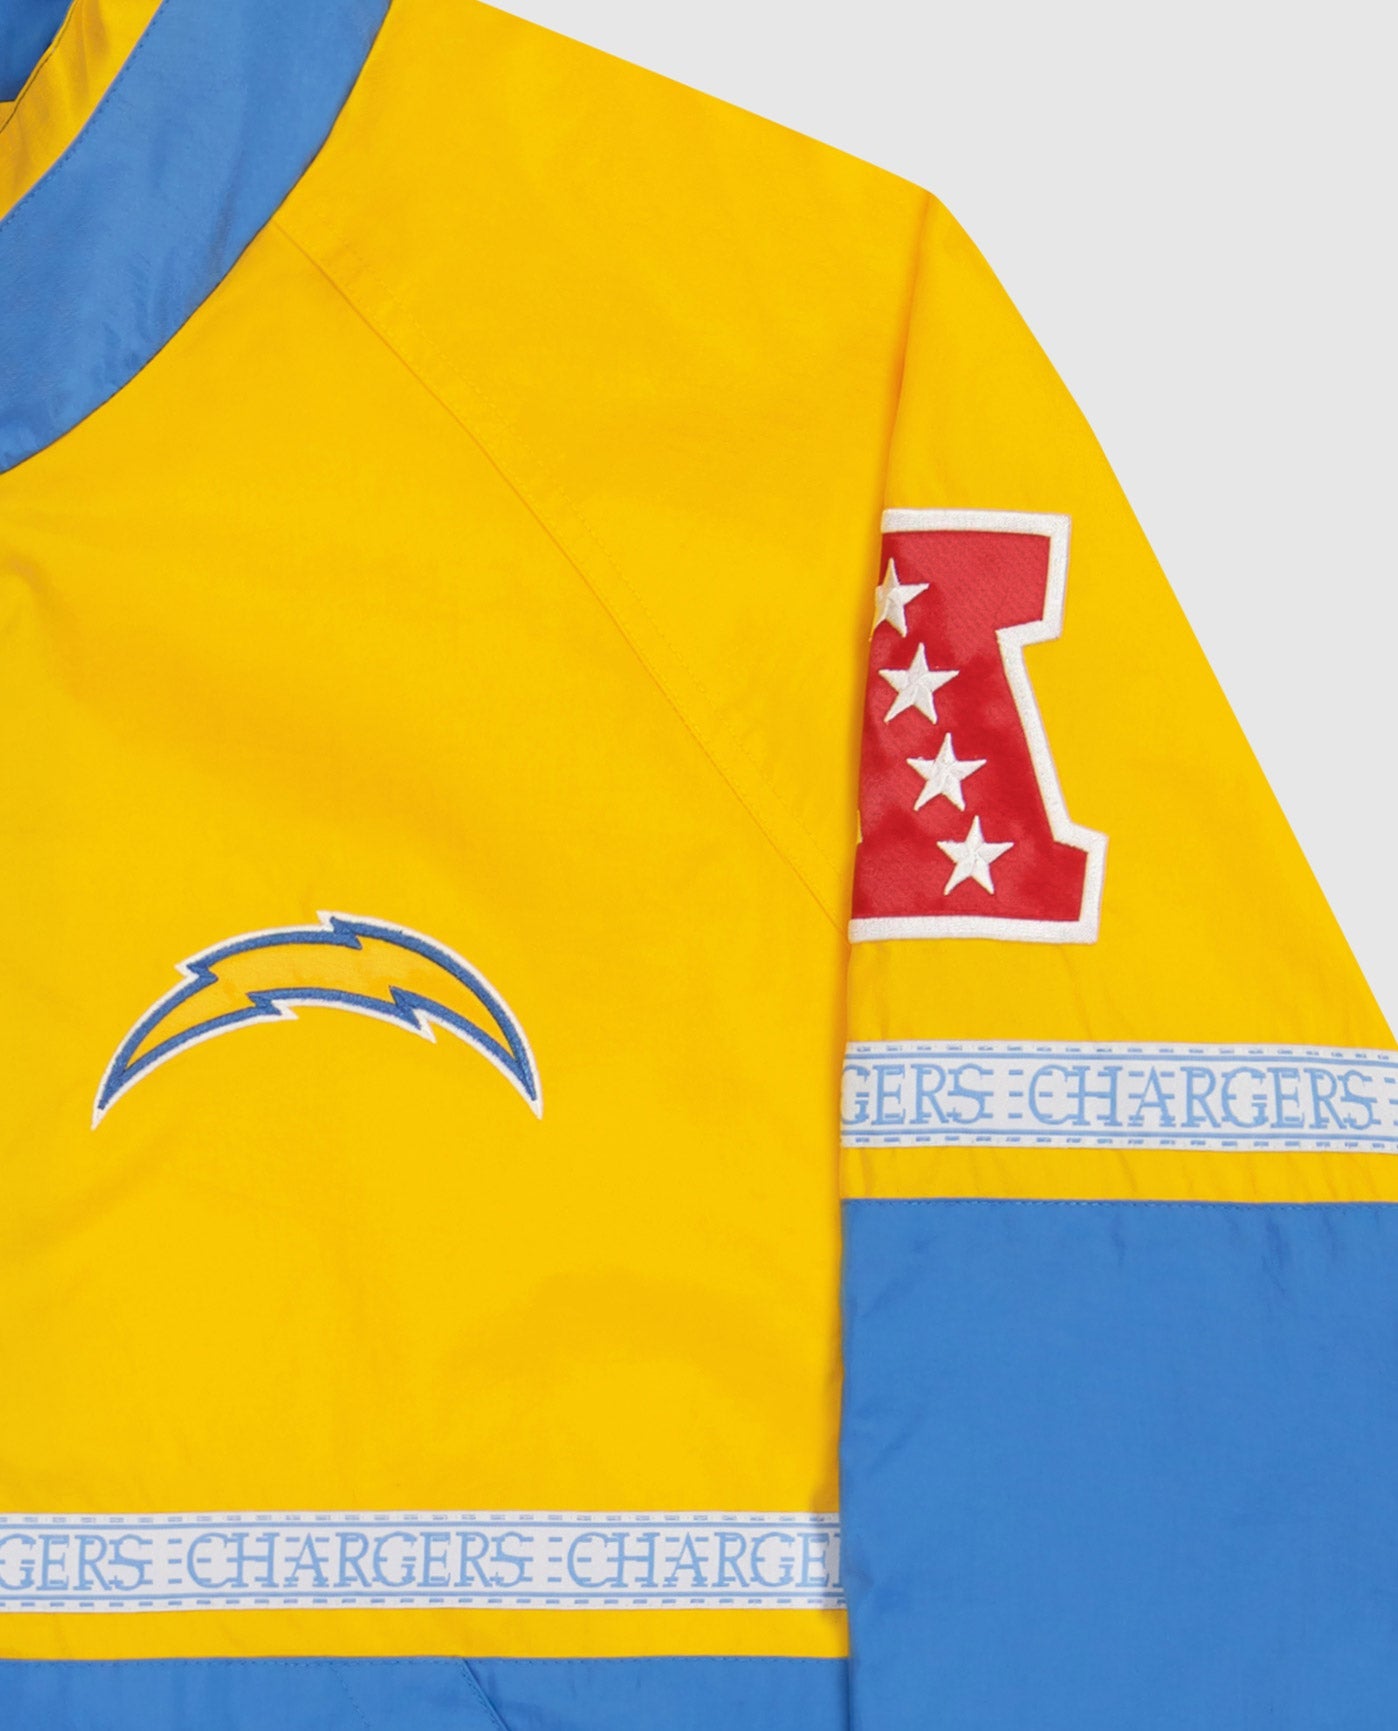 Los Angeles Chargers logo top left chest,Twill Applique Conference logo and "LOS ANGELES CHARGERS" tape on mid body and sleeves | Chargers Gold Light Blue